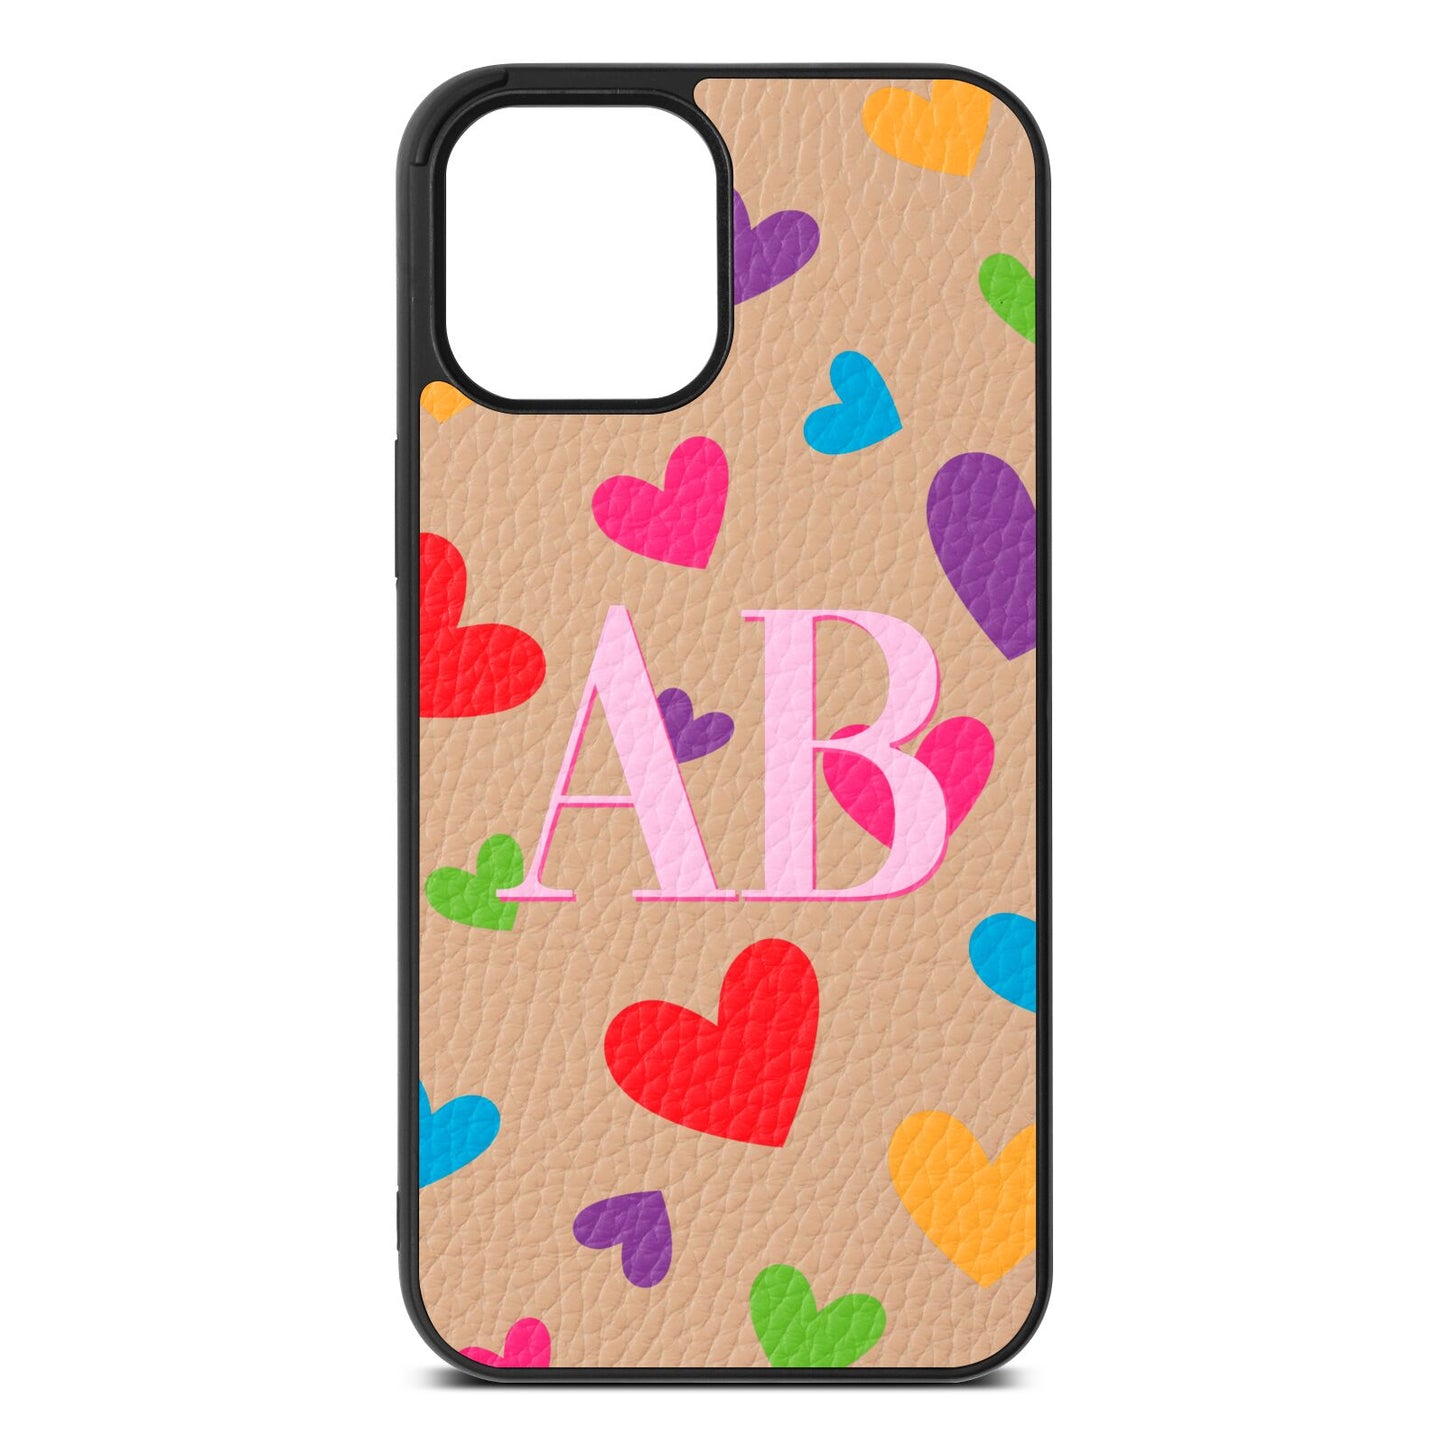 Contrast Initials Heart Print Nude Pebble Leather iPhone 12 Pro Max Case